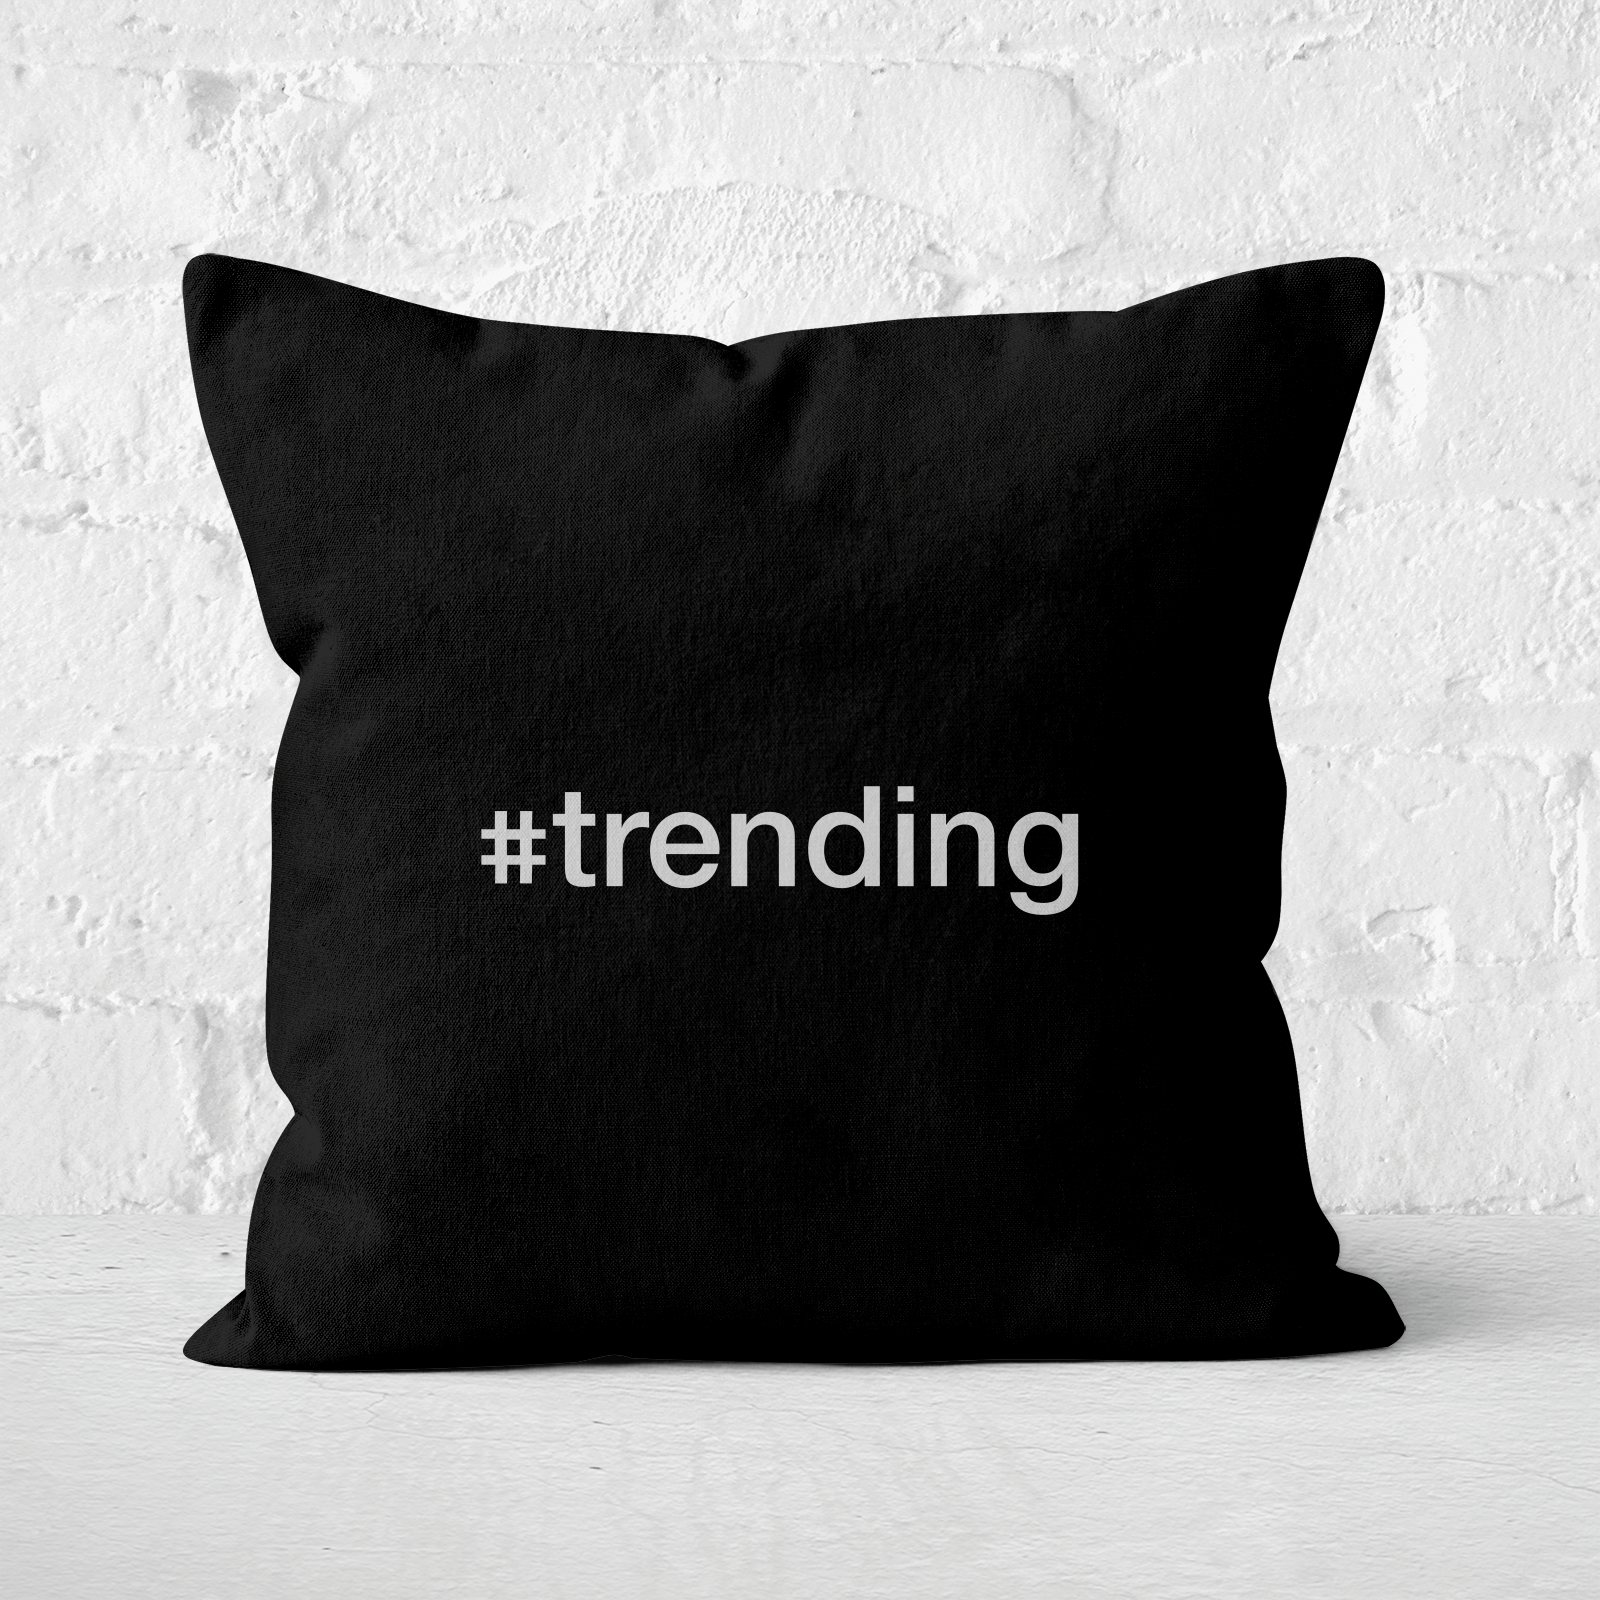 Trending Square Cushion - 60x60cm - Soft Touch